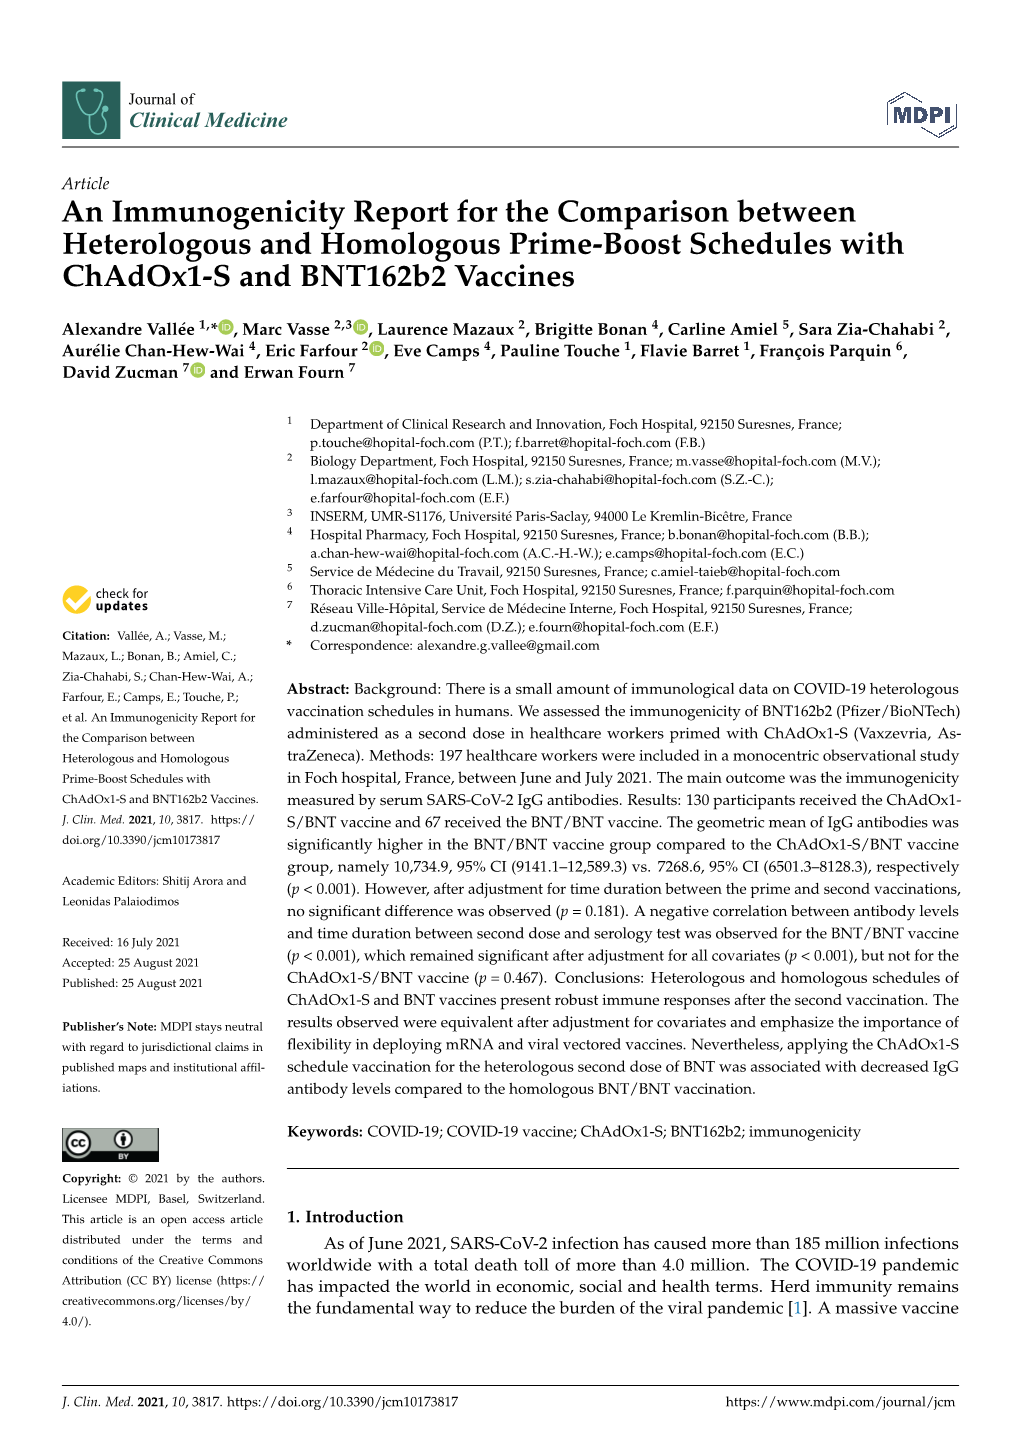 An Immunogenicity Report for the Comparison Between Heterologous and Homologous Prime-Boost Schedules with Chadox1-S and Bnt162b2 Vaccines